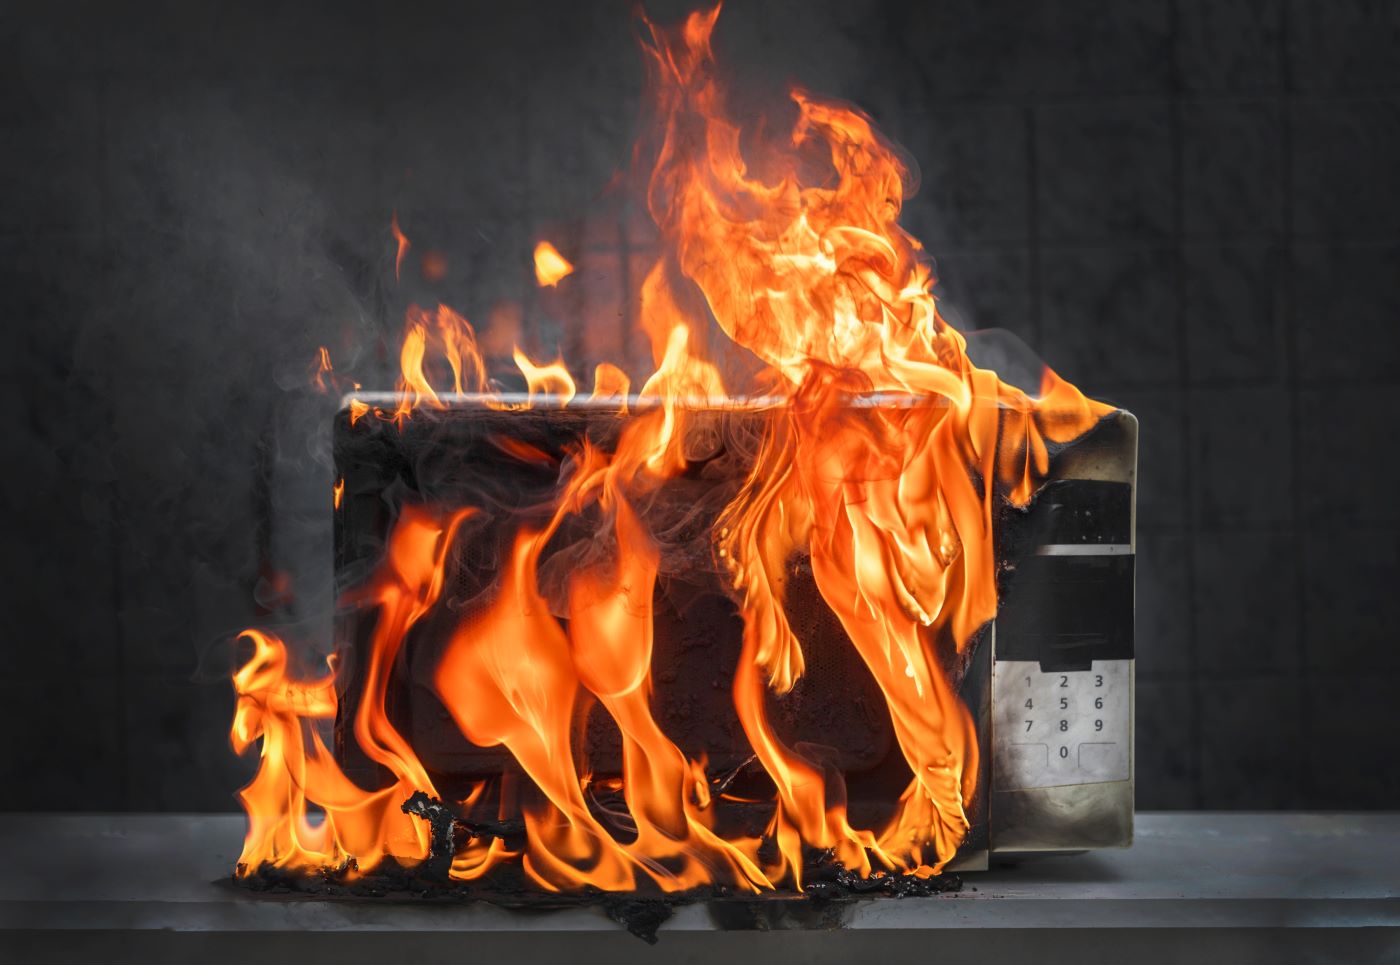 microwave oven white, in fire front view, electrical appliances caught fire as a result of improper operation